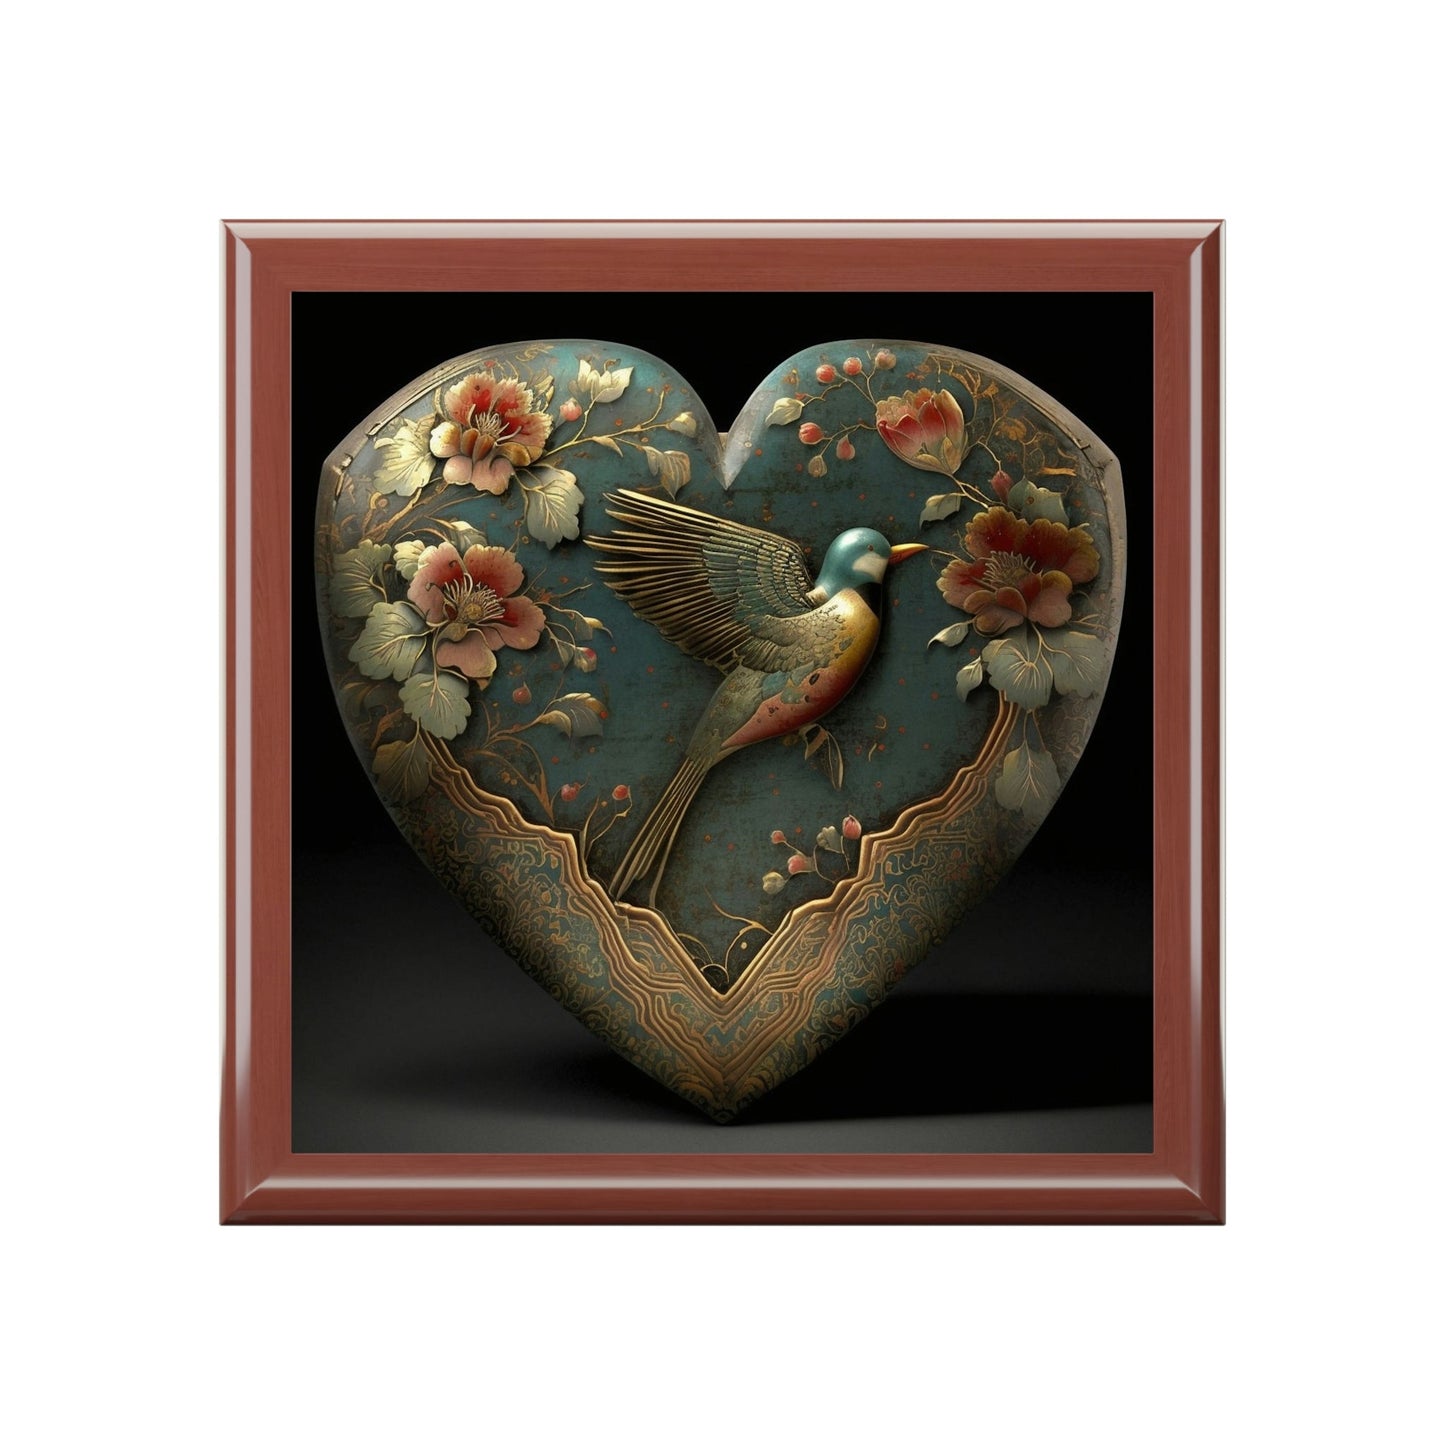 Antique Heirloom Heart Wood Keepsake Jewelry Box with Ceramic Tile Cover